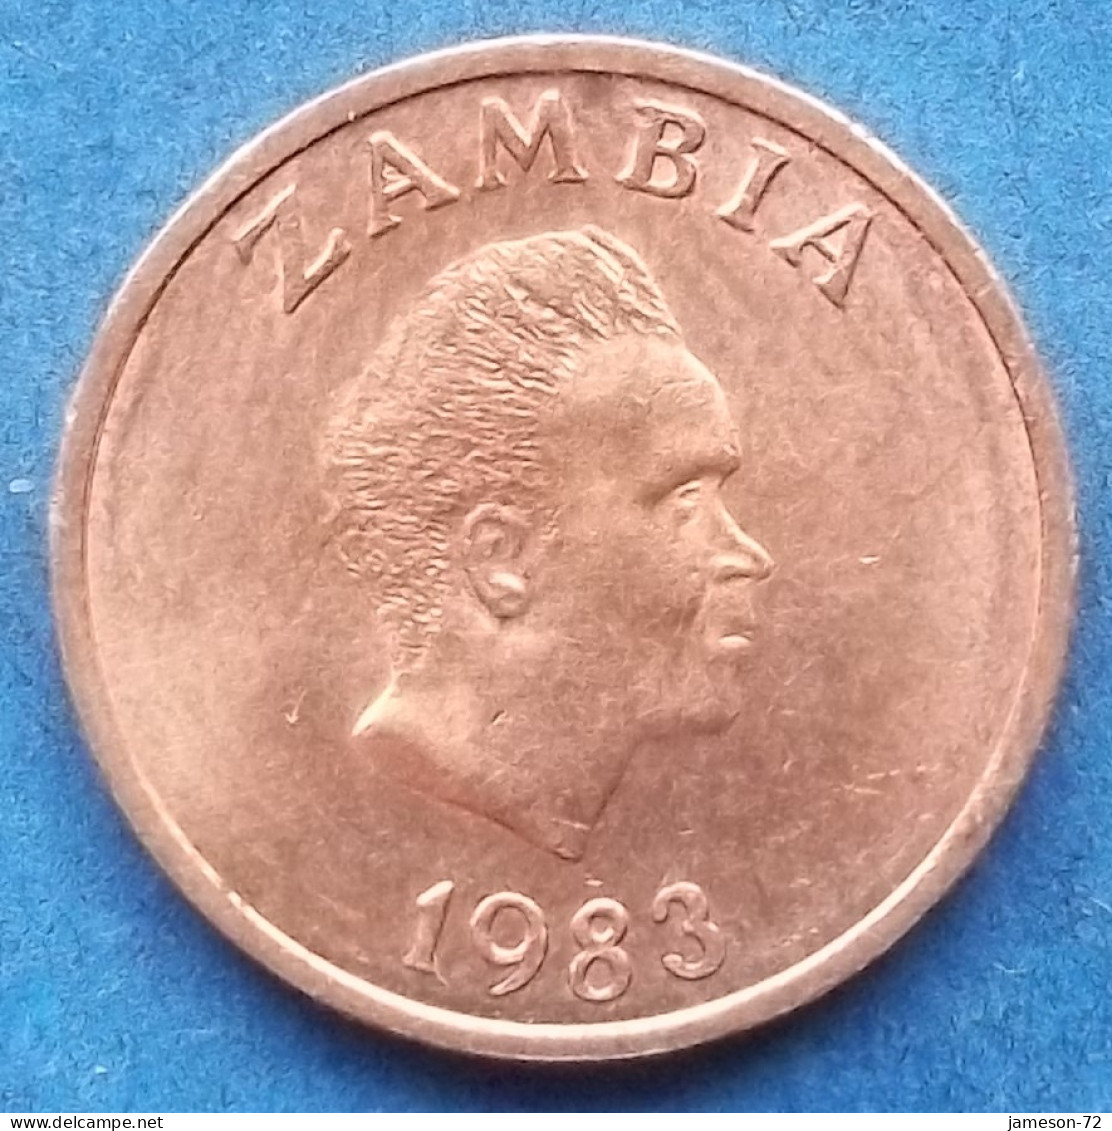 ZAMBIA - 1 Ngwee 1983 "Aardvark" KM# 9a Decimal Coinage (1968-2013) - Edelweiss Coins - Zambia